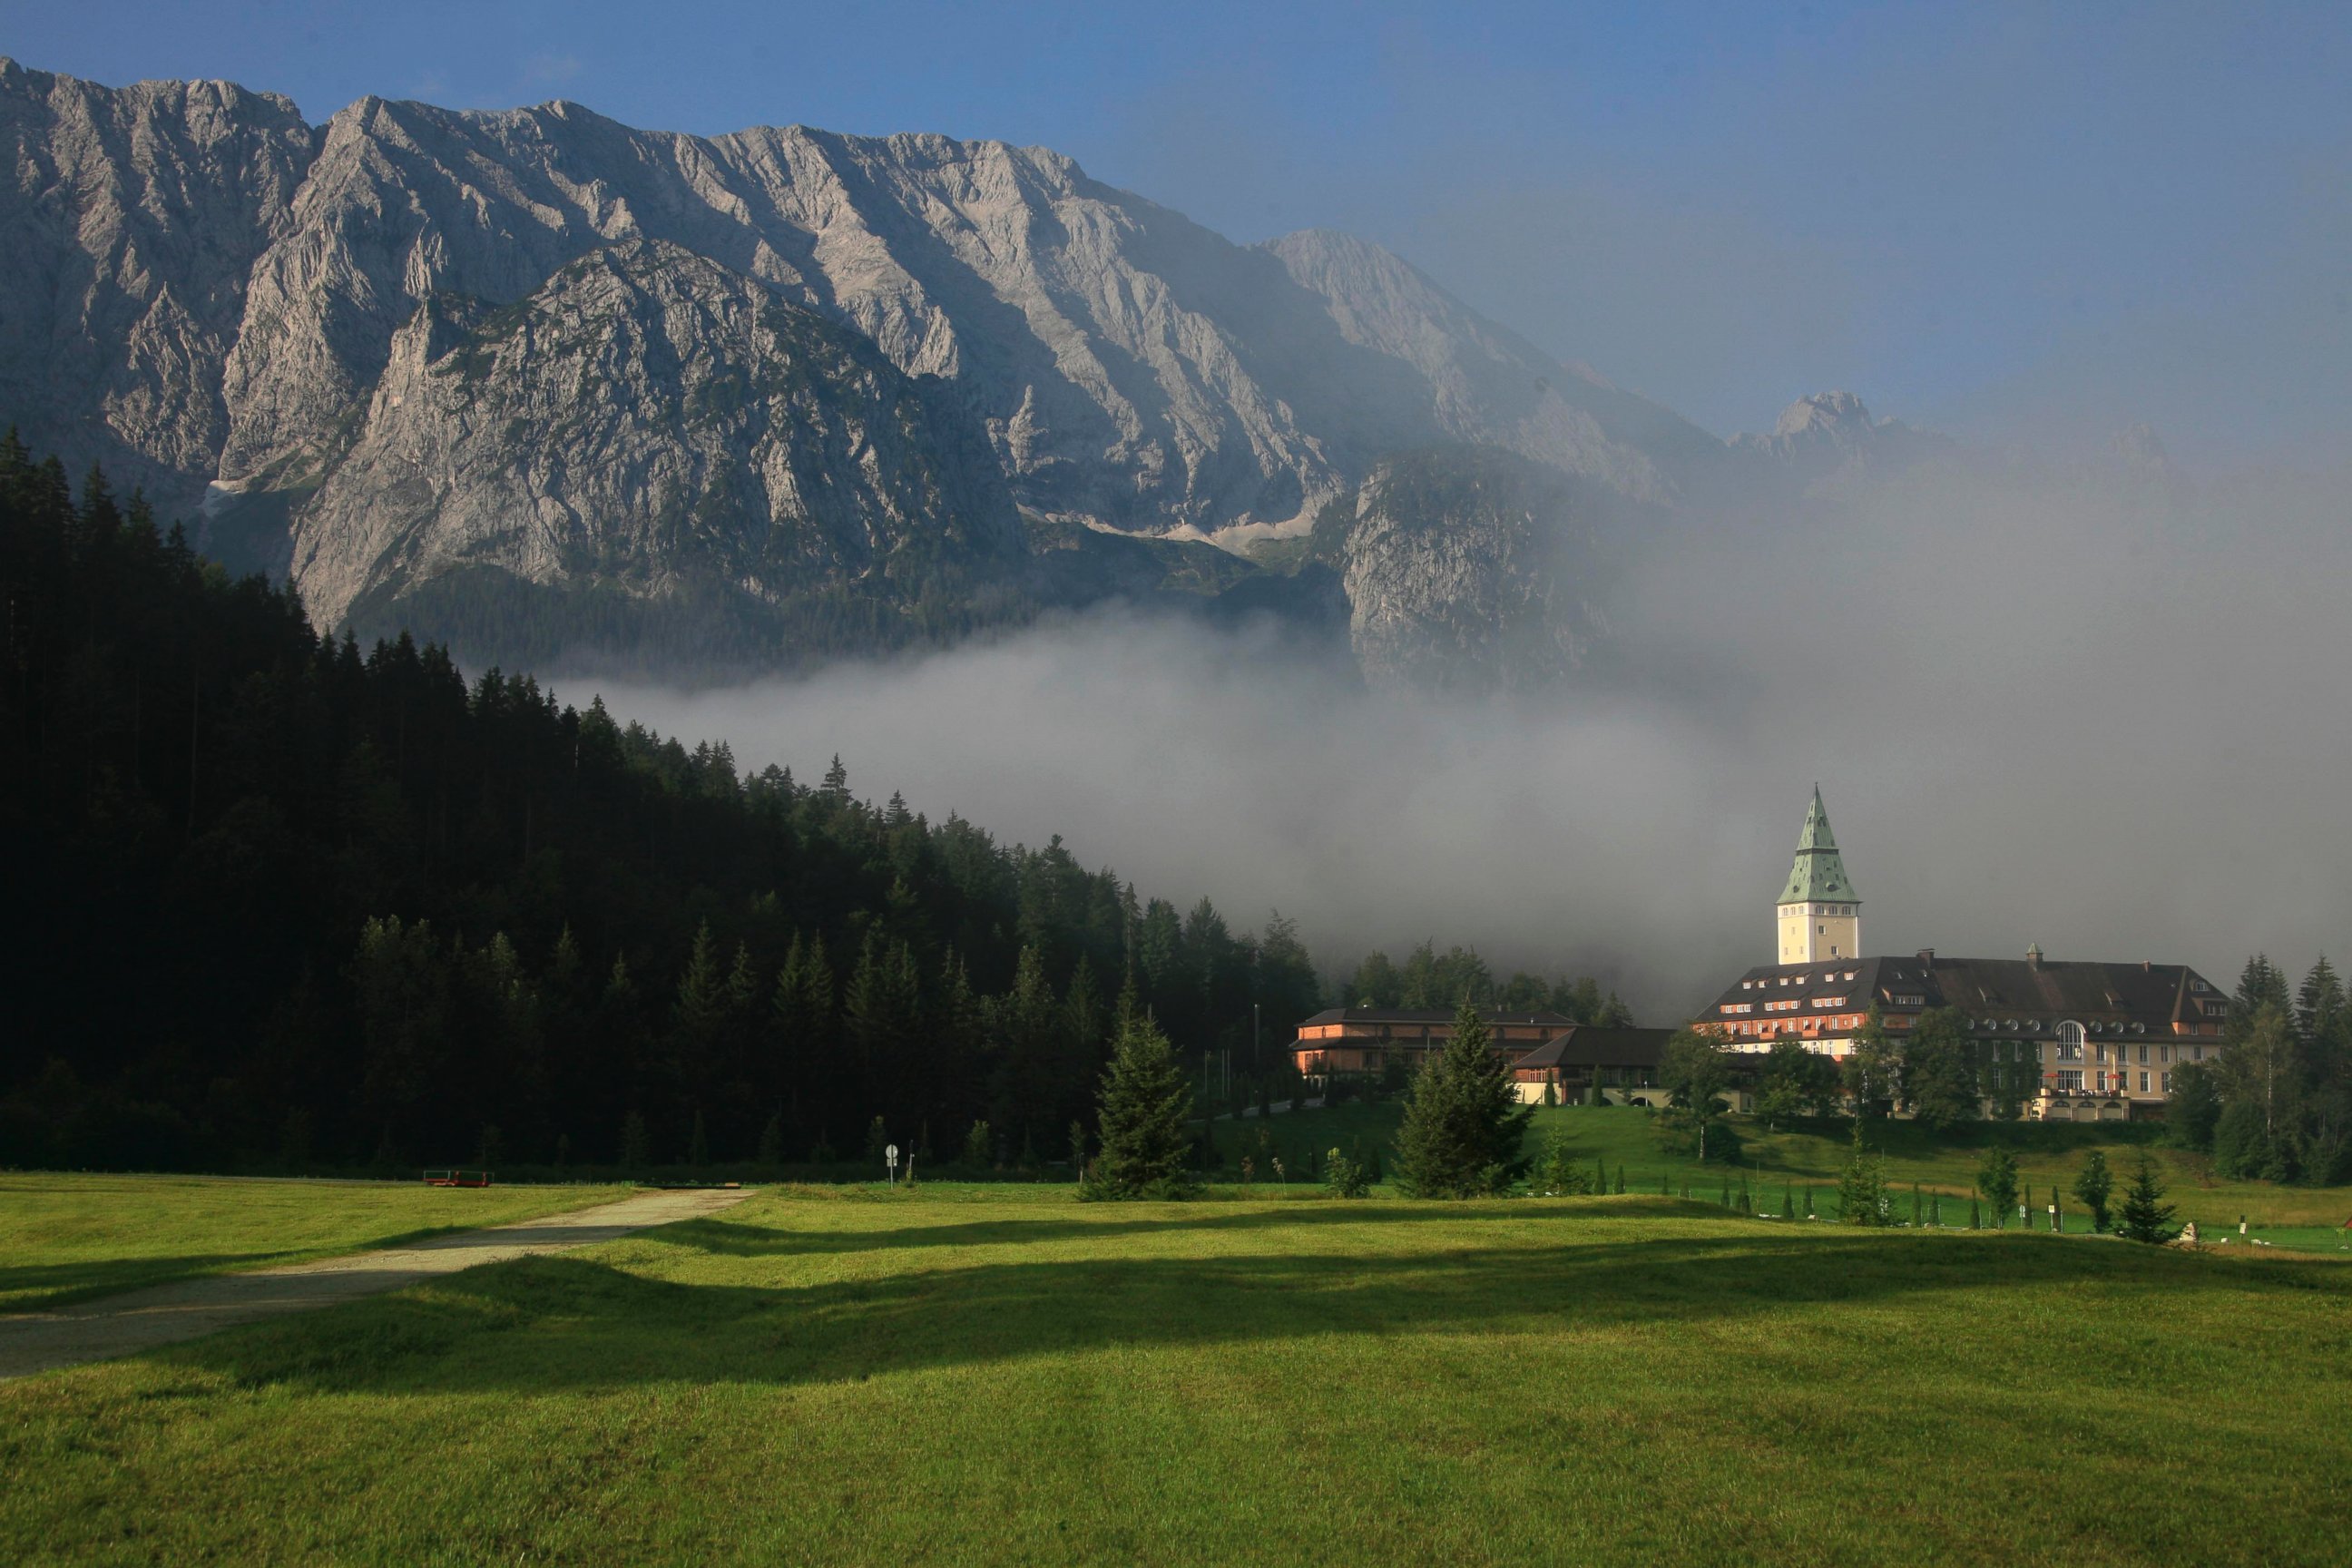 PHOTO: The Schloss Elmau, which is hosting the G7 Summit, is in Krun, Germany in the Bavarian Alps.